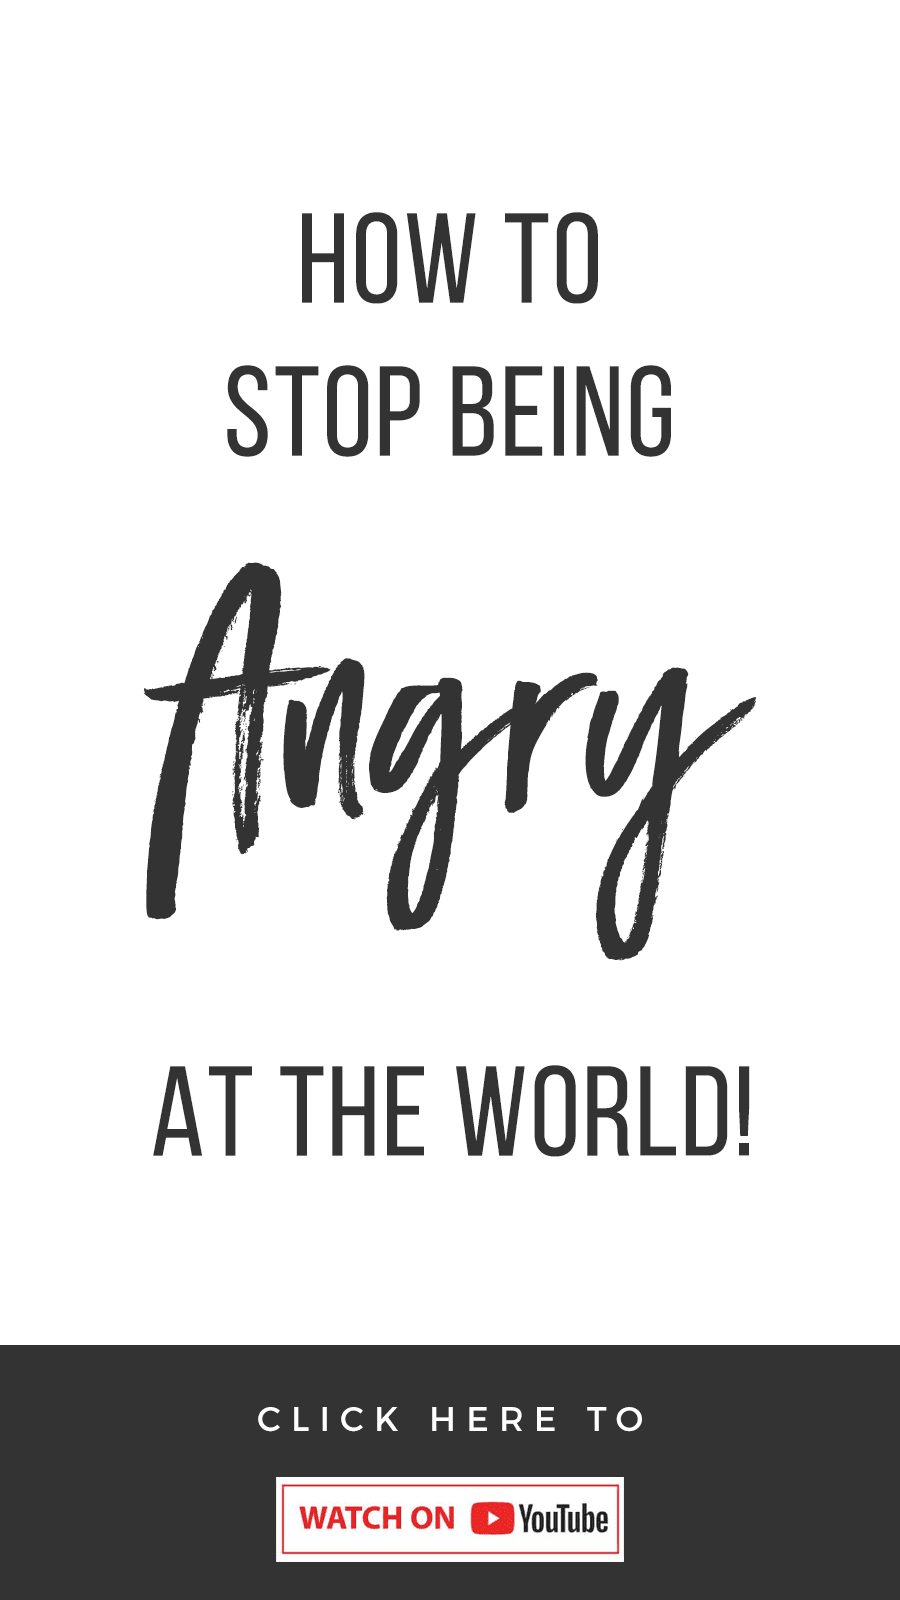 How To Stop Being Angry At The World!